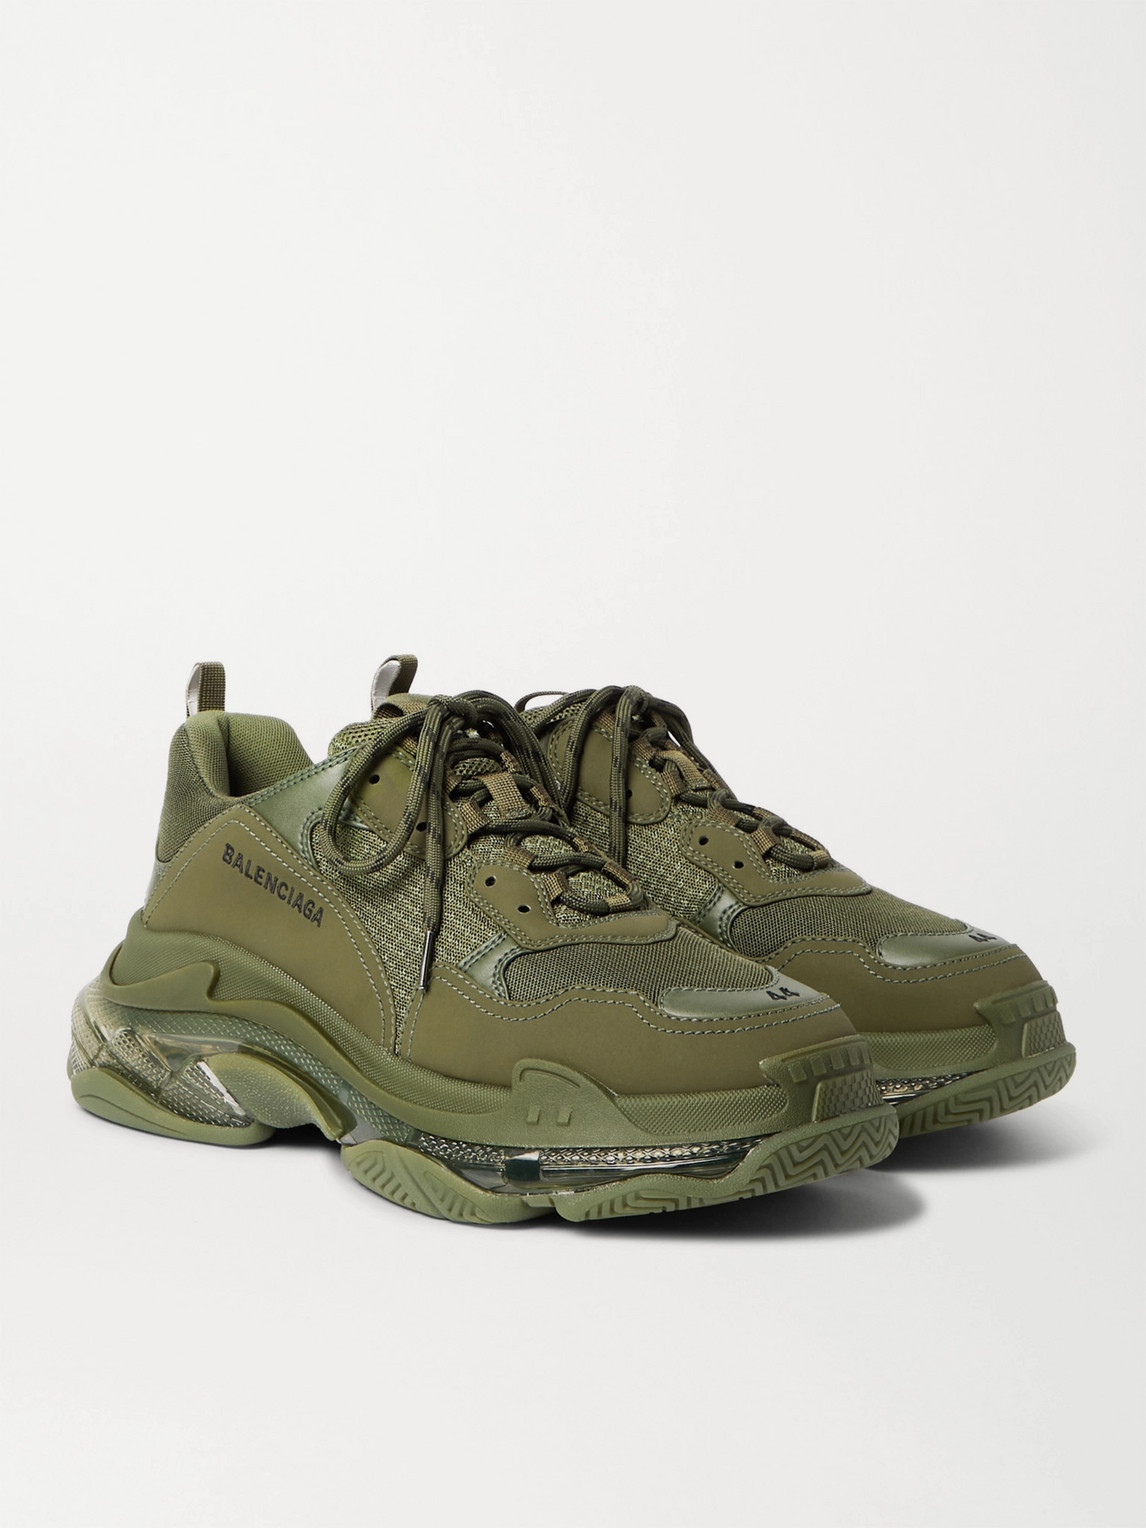 BALENCIAGA TRIPLE S CLEAR SOLE MESH, NUBUCK AND LEATHER trainers